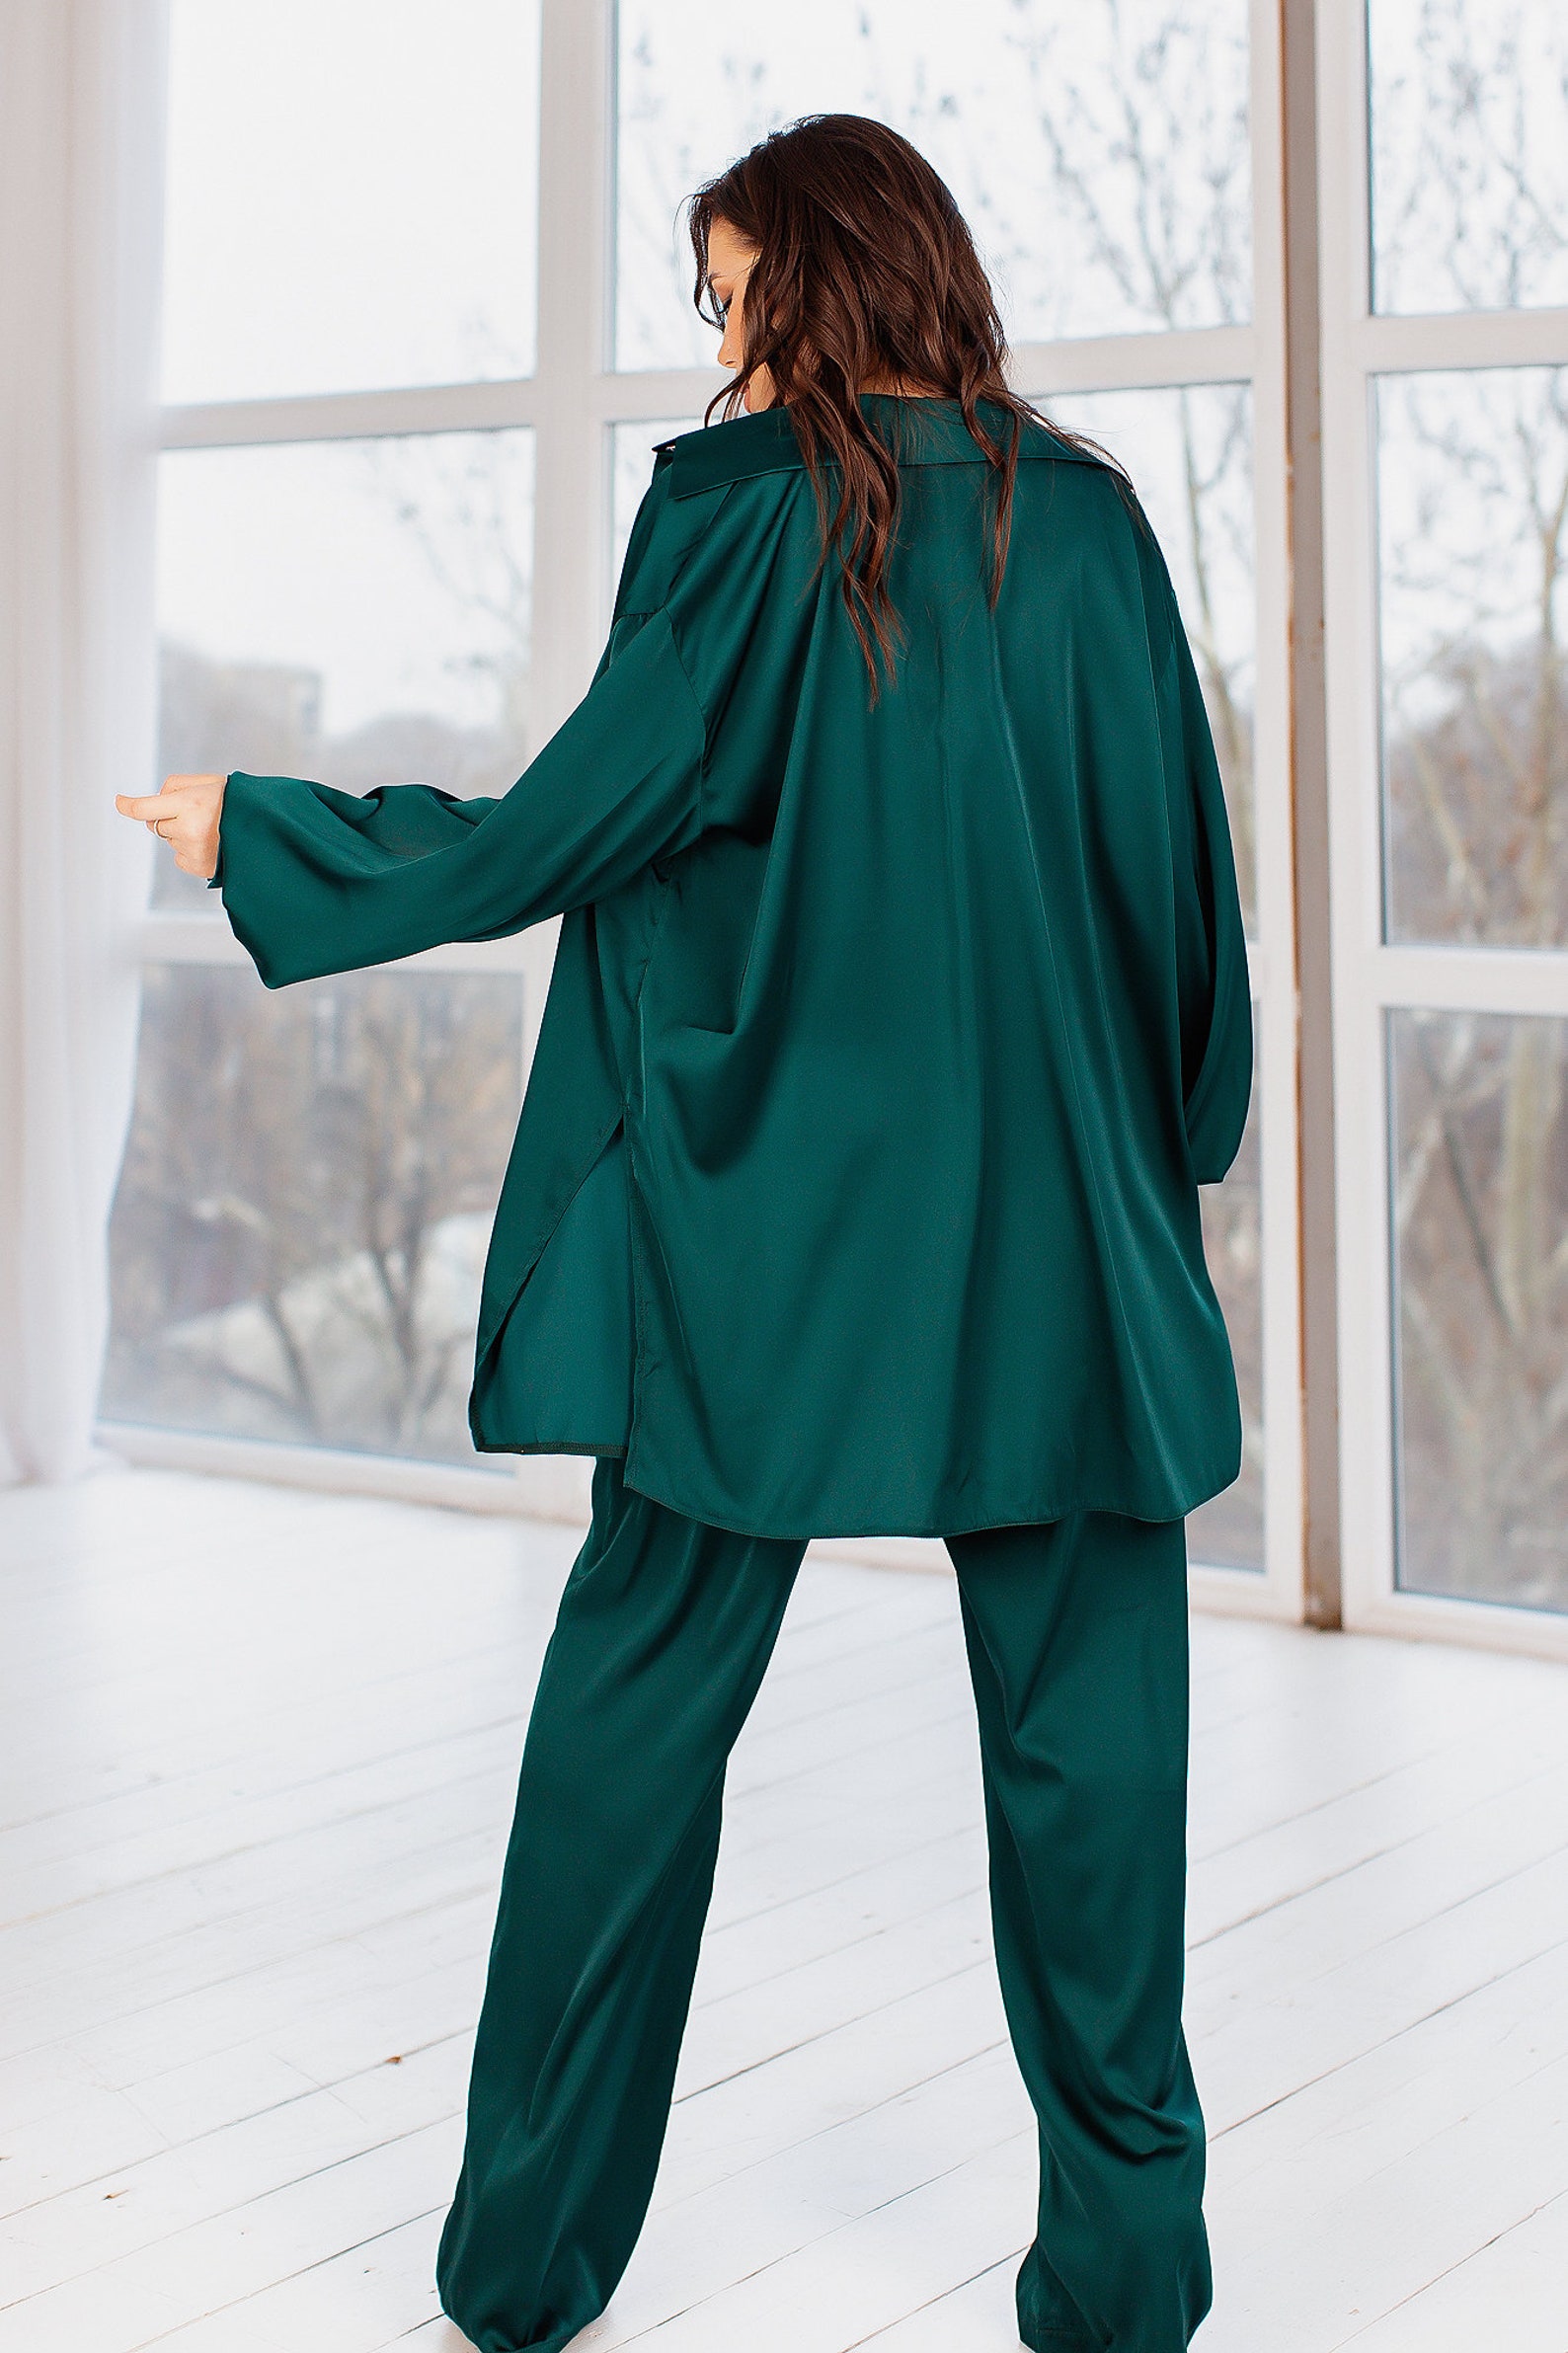 Forest Green Silk Pant Suit for Women Satin Three Piece - Etsy